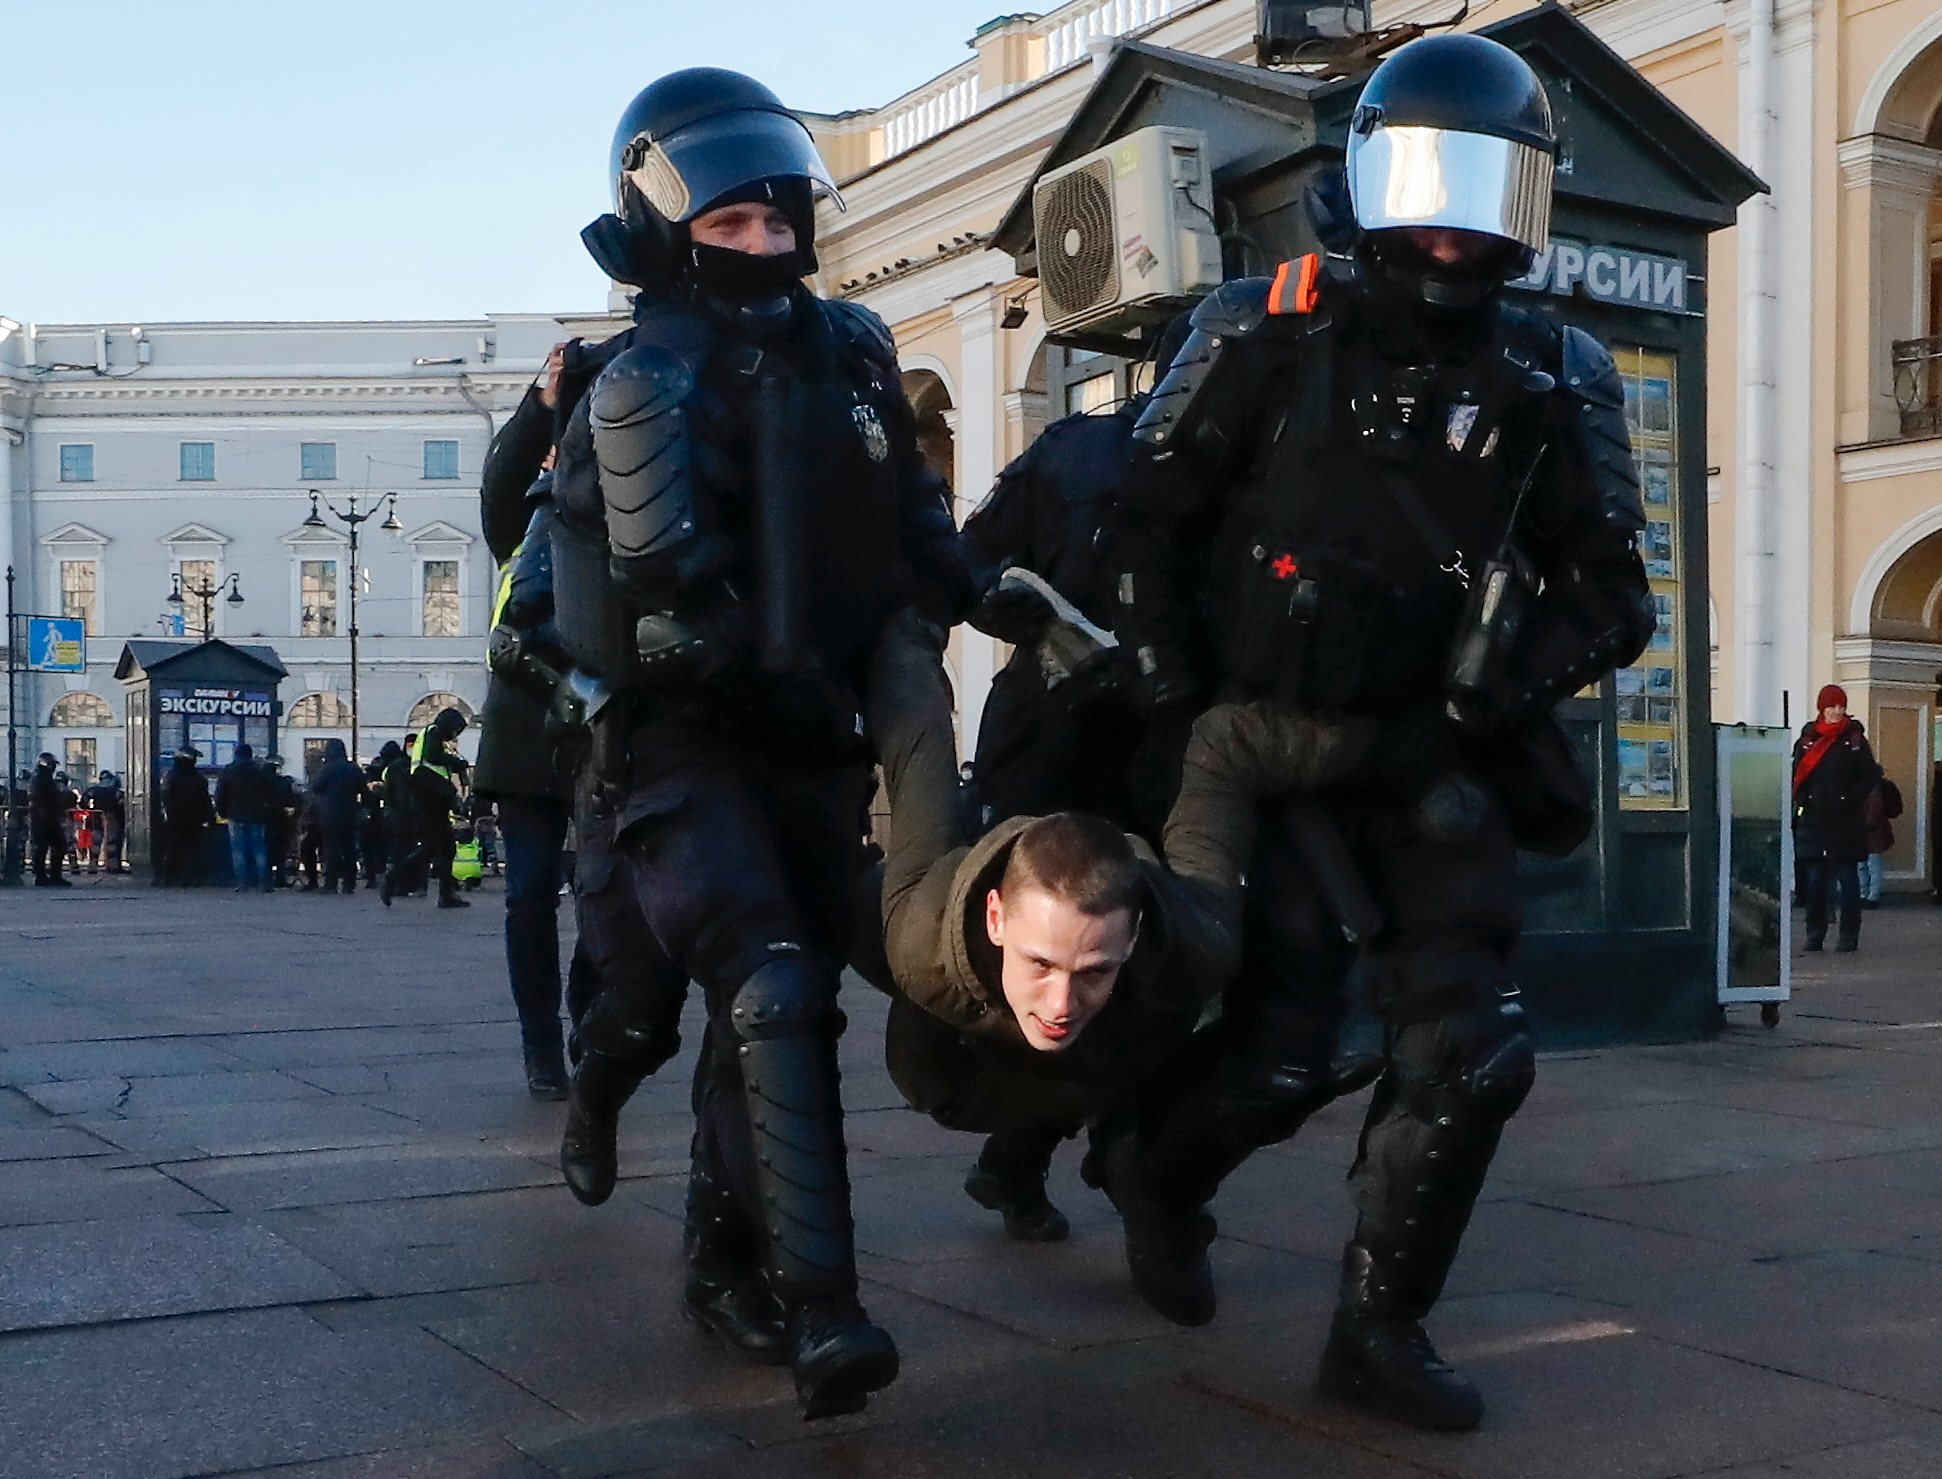 epa09805472 Russian policemen detain a participant in an unauthorized rally against the Russian military operation in Ukraine, in Saint Petersburg, Russia, 06 March 2022. According to independent Russian human rights group OVD-Info, hundreds of people were arrested in protests throughout major Russian cities on 06 March.  EPA/ANATOLY MALTSEV